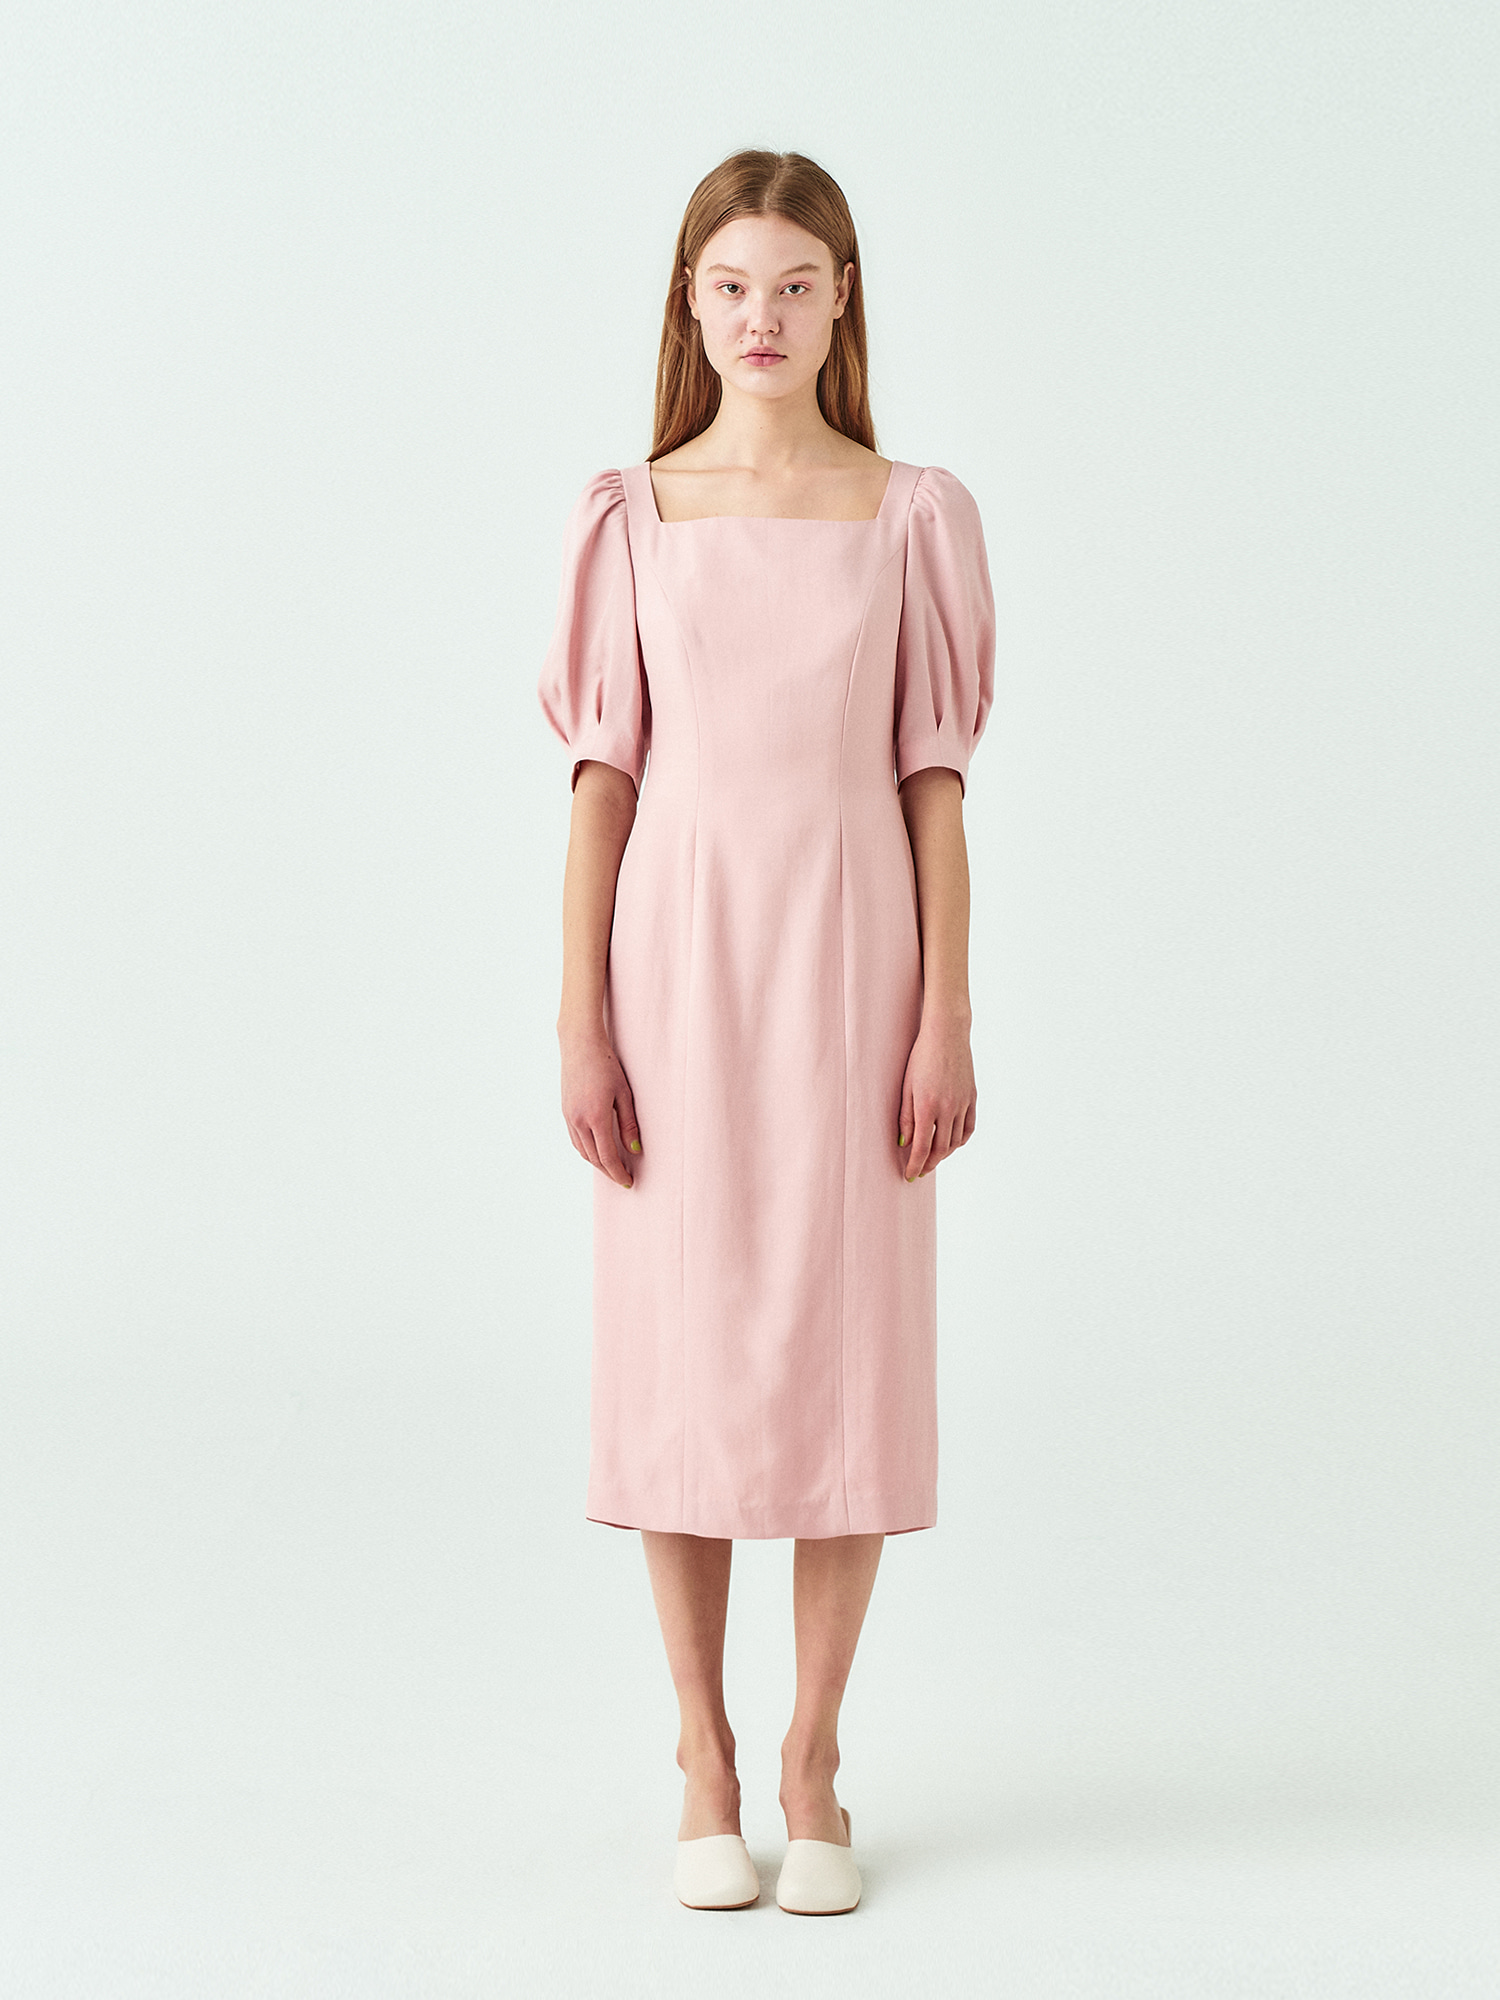 [B급]Square Neck Line Dress in Pink